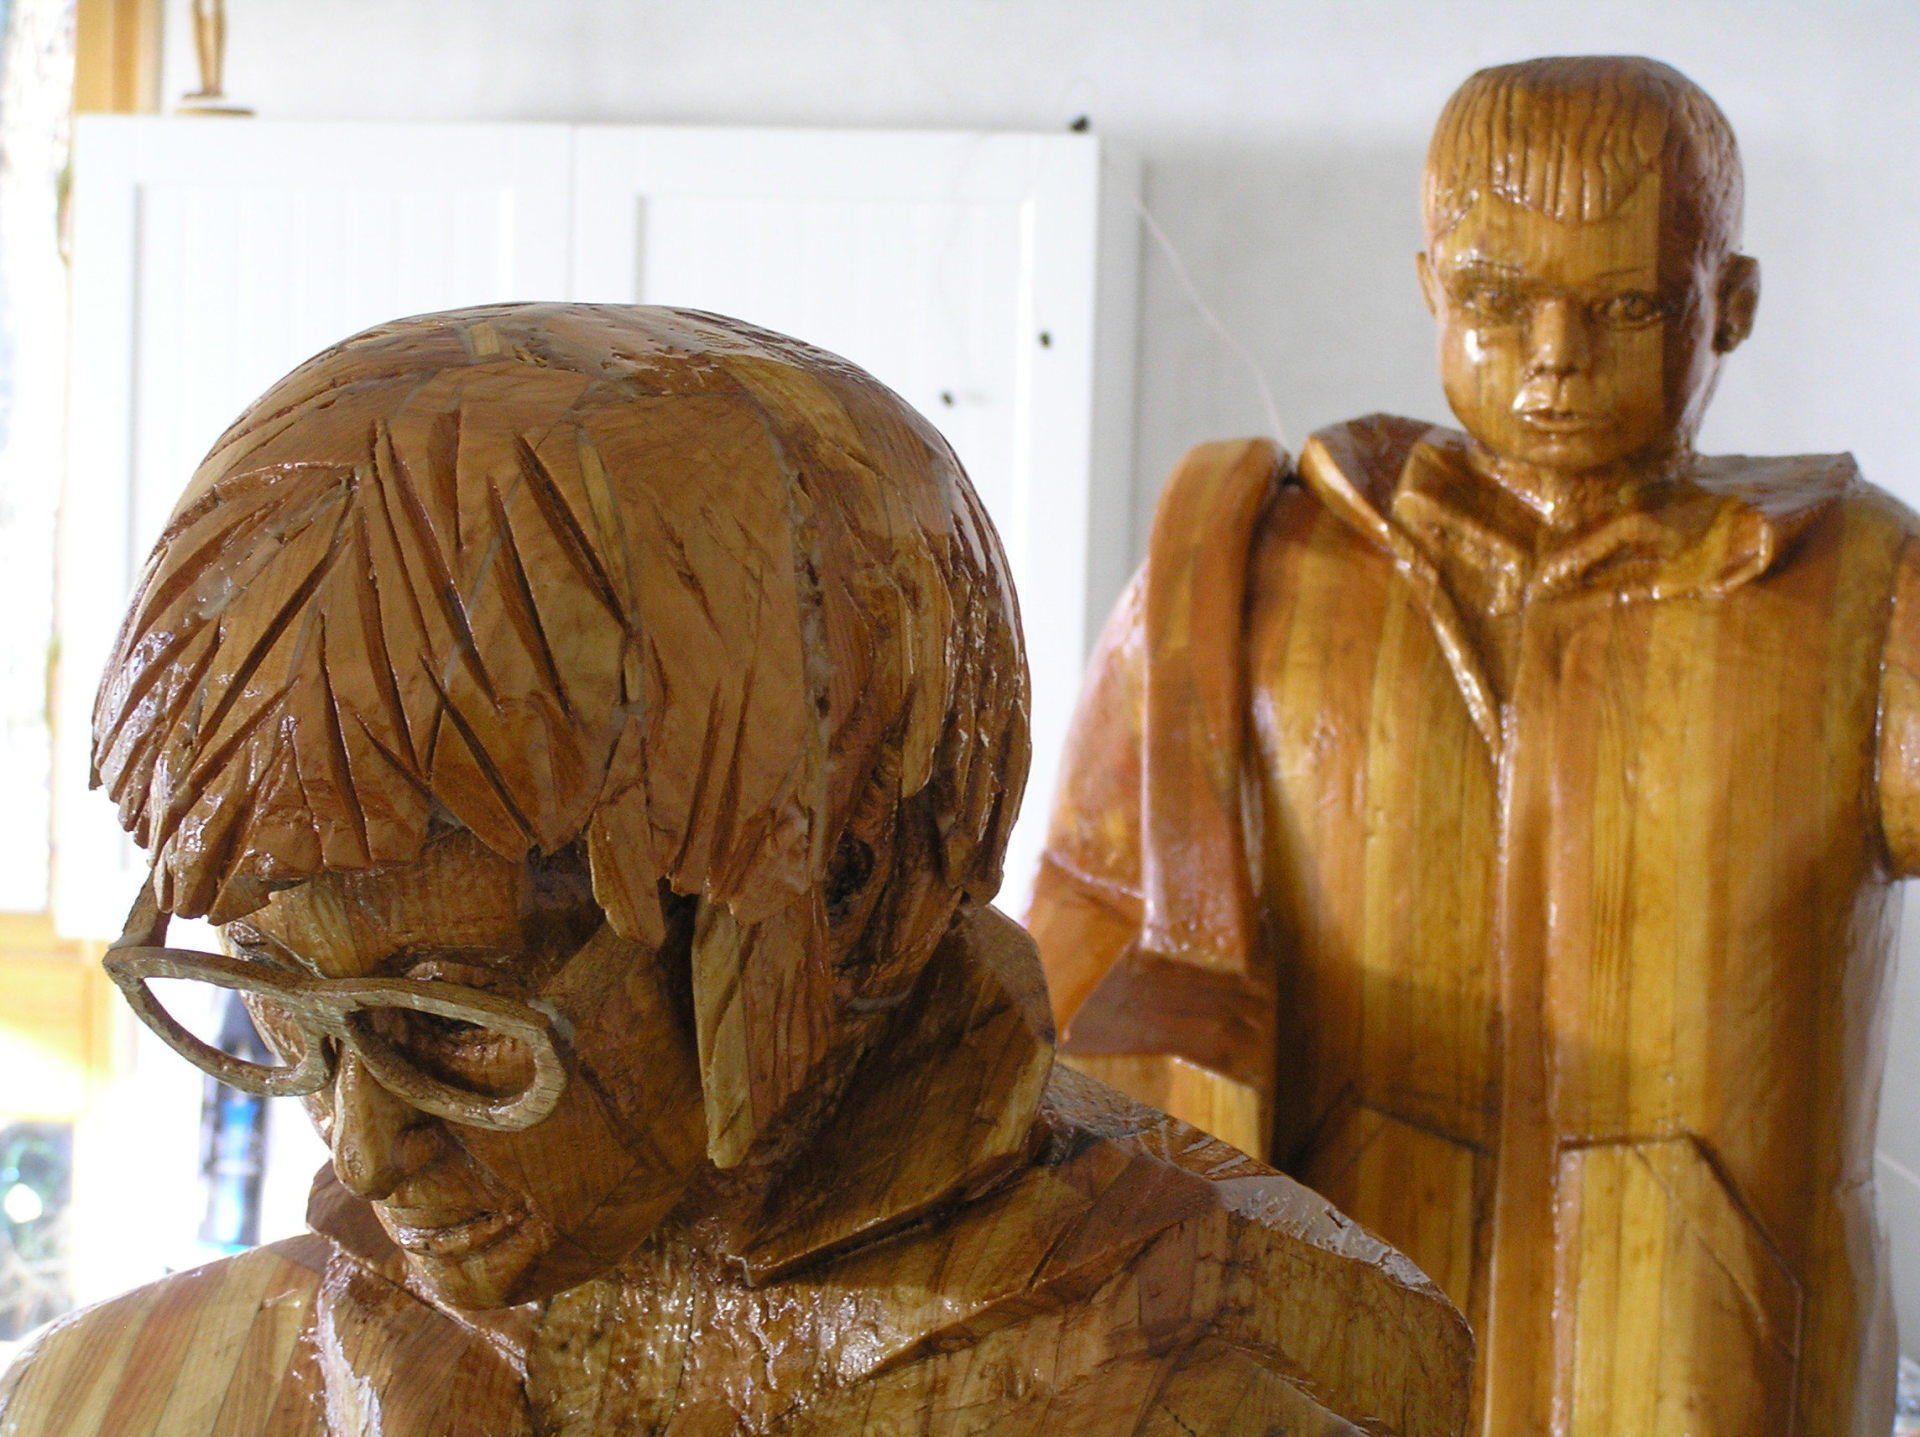 Contemporary wooden British figurative sculpture made by Ingrained Culture